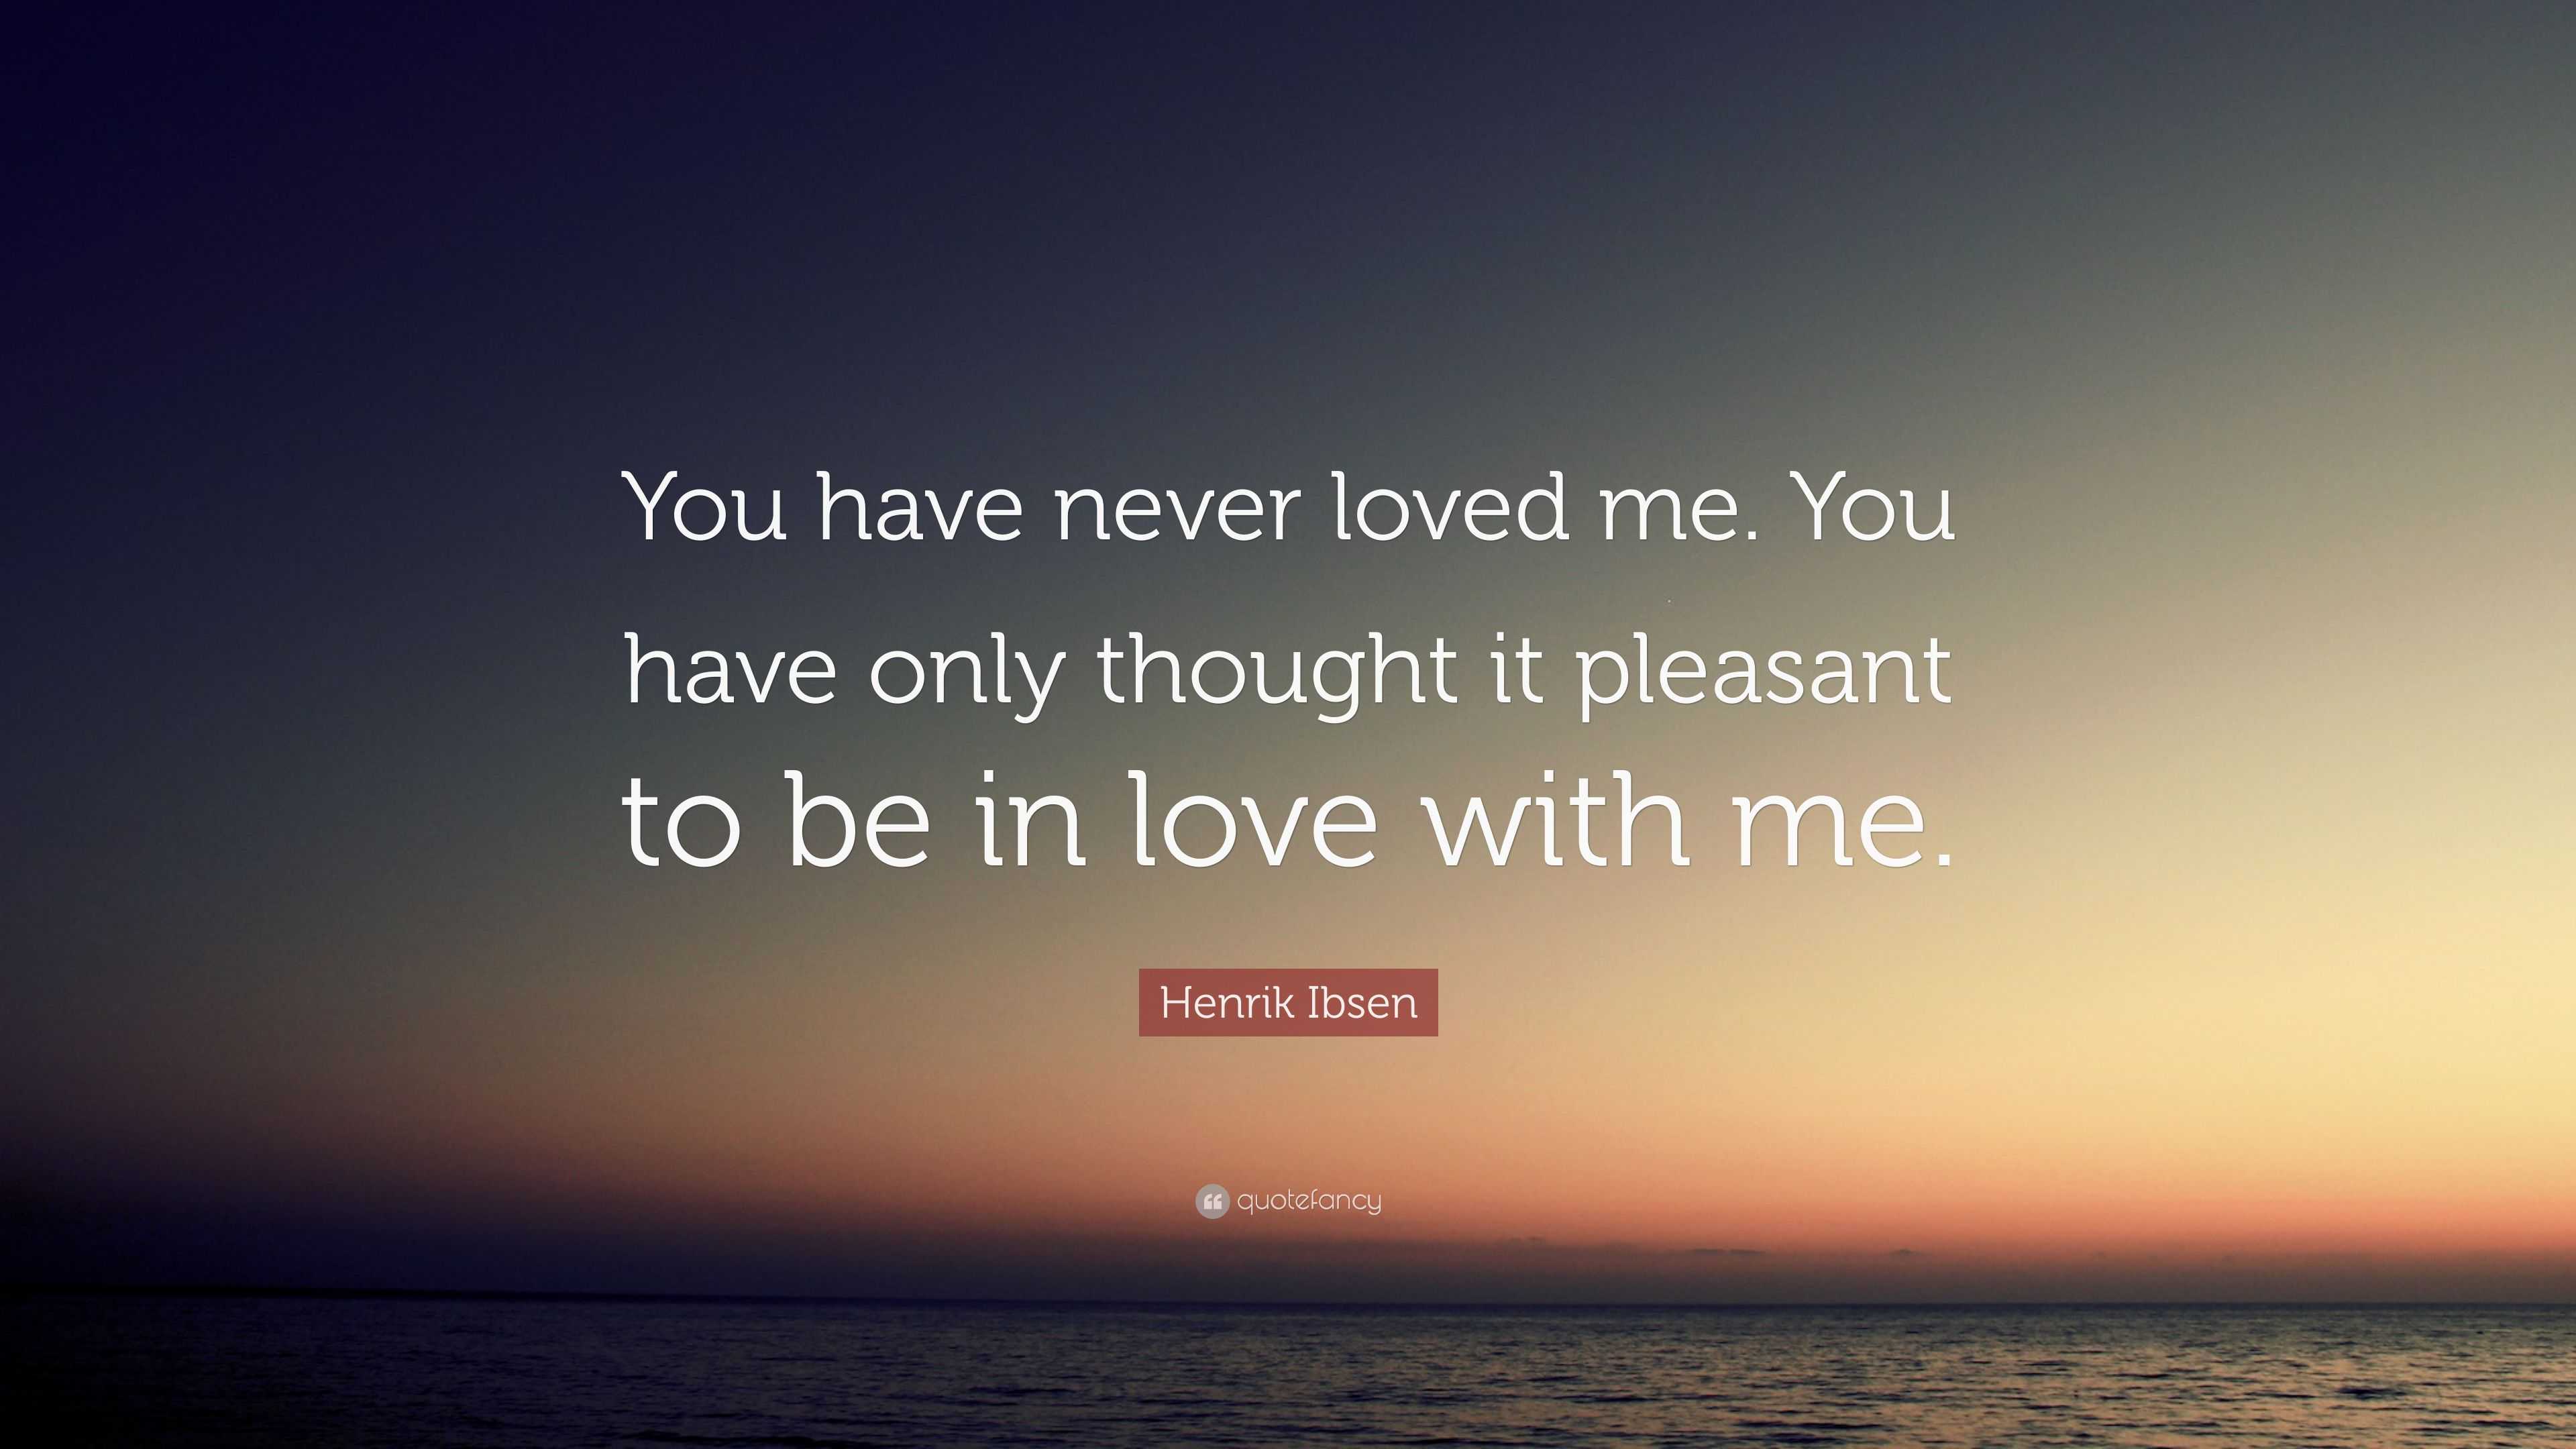 Henrik Ibsen Quote: “You have never loved me. You have only thought it ...